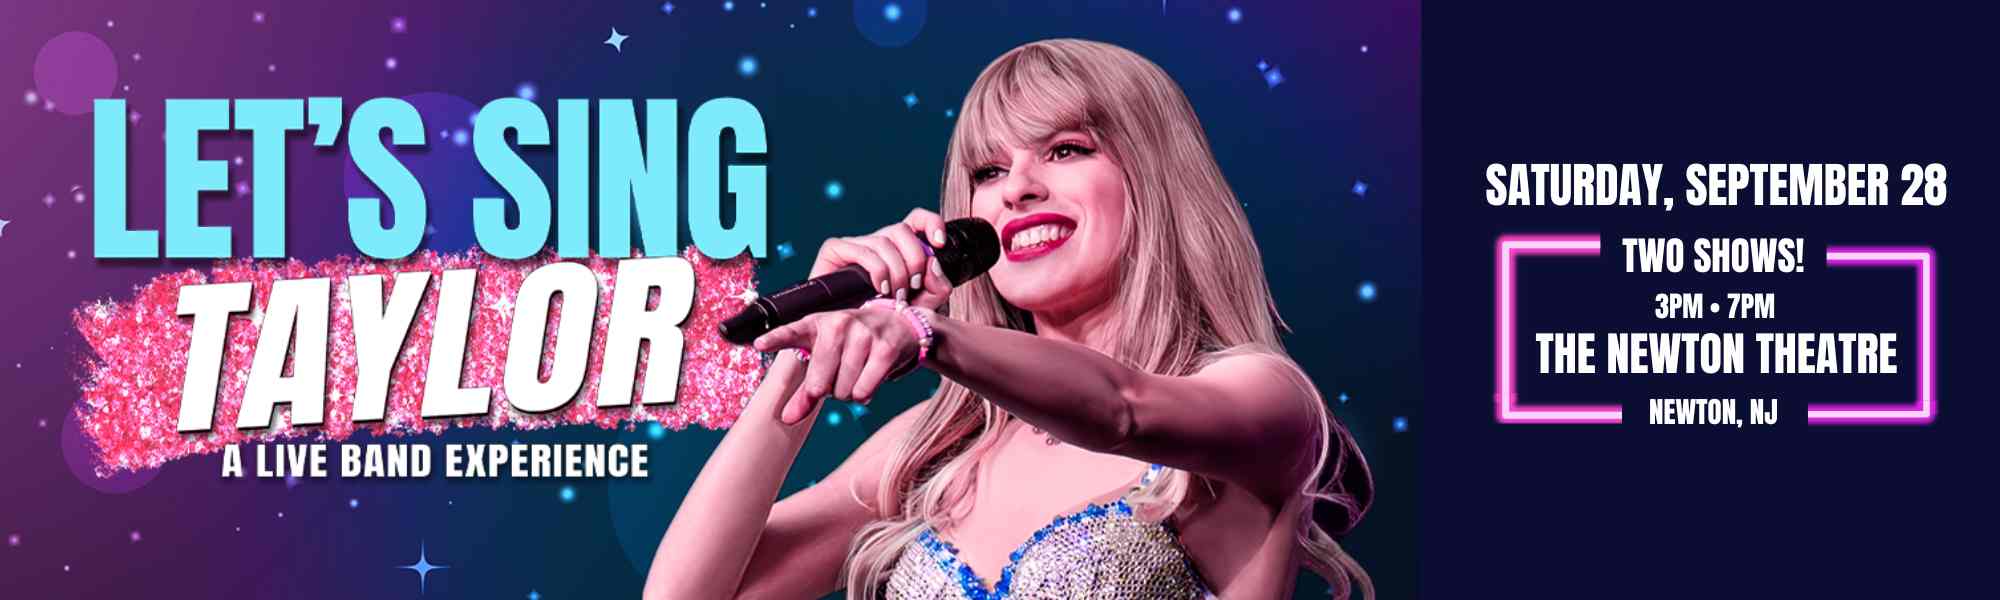 Let's Sing Taylor comes to The Newton Theatre on Saturday, September 28th.